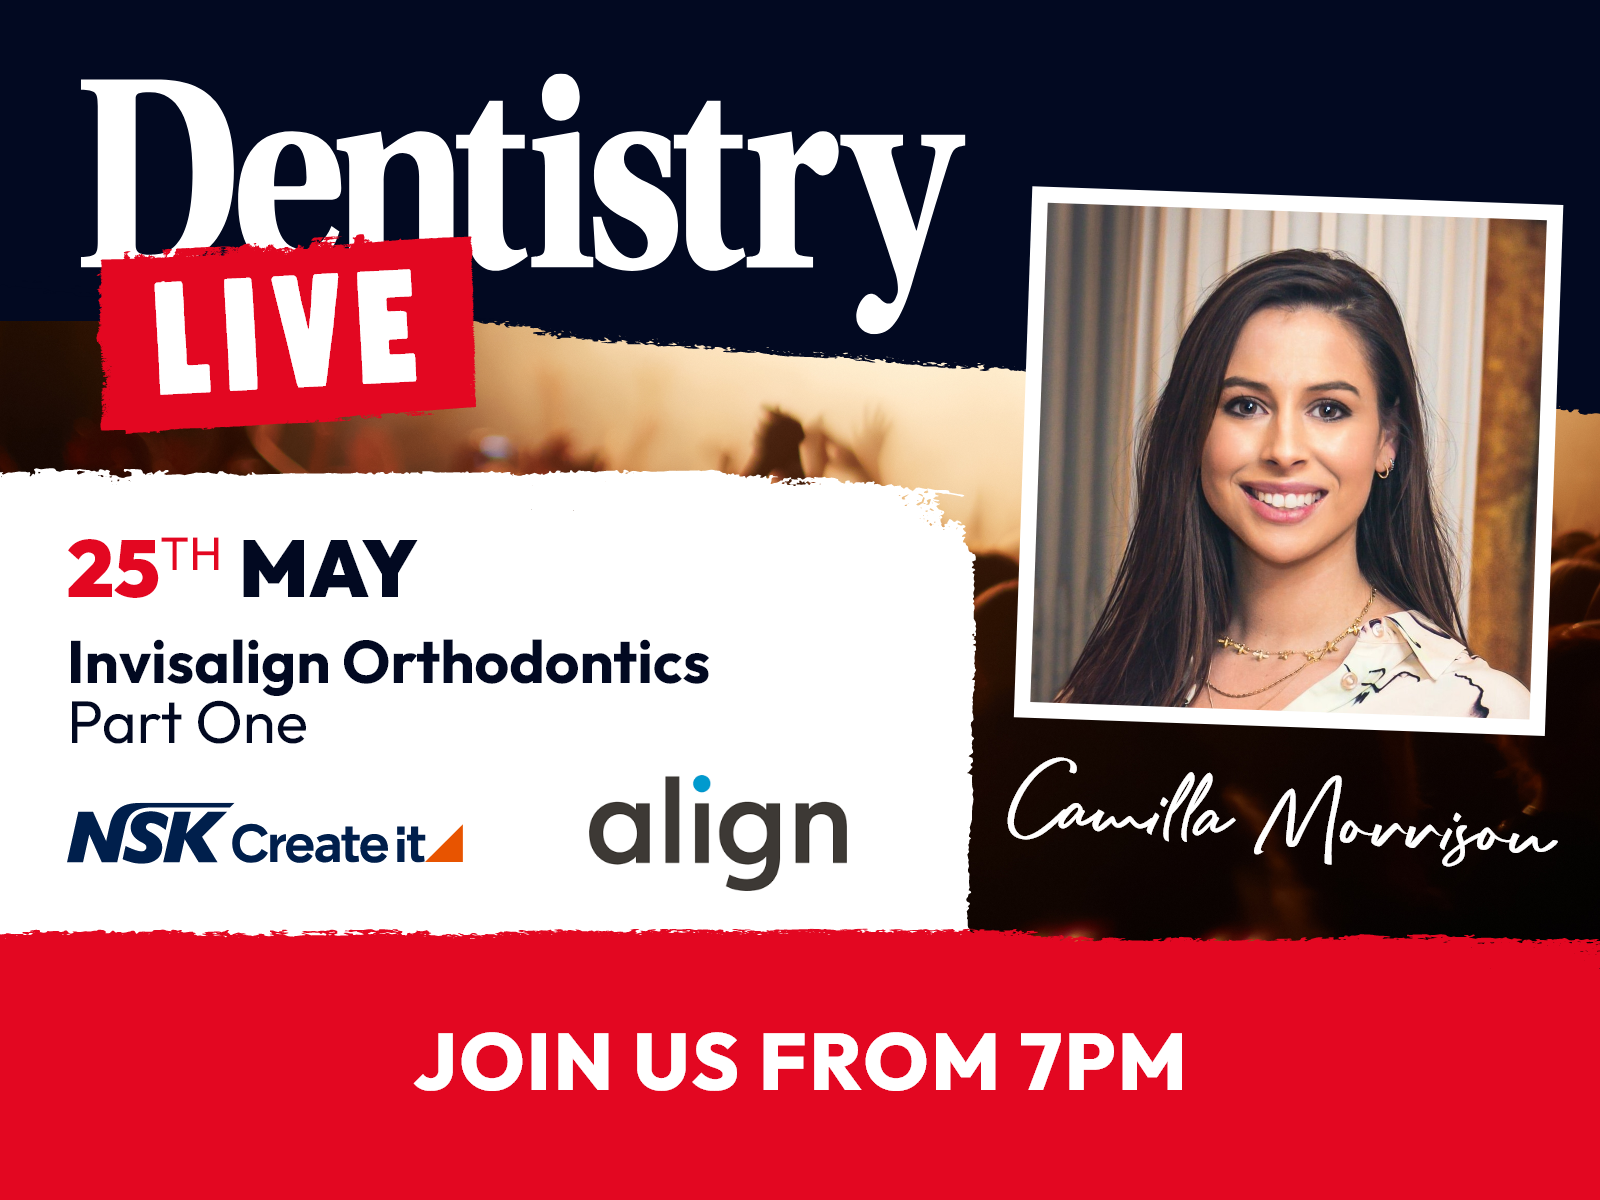 Join Camilla Morrison this Thursday 25 May at 7pm for Invisalign orthodontics live – part one. Sign up now!